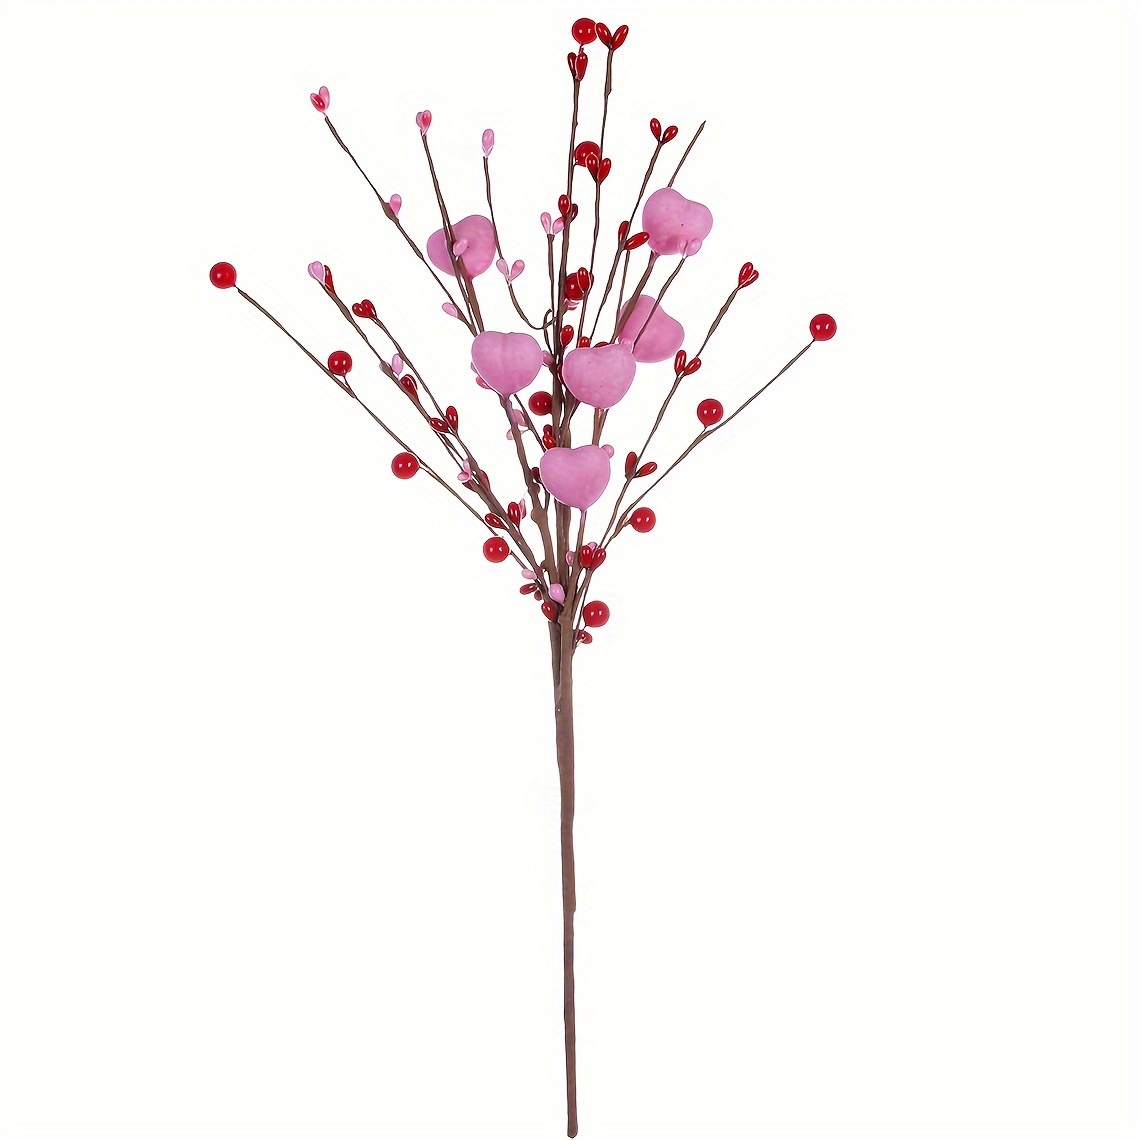 1PC Red Berry Picks Artificial Red Berries Stems for Home Bedroom